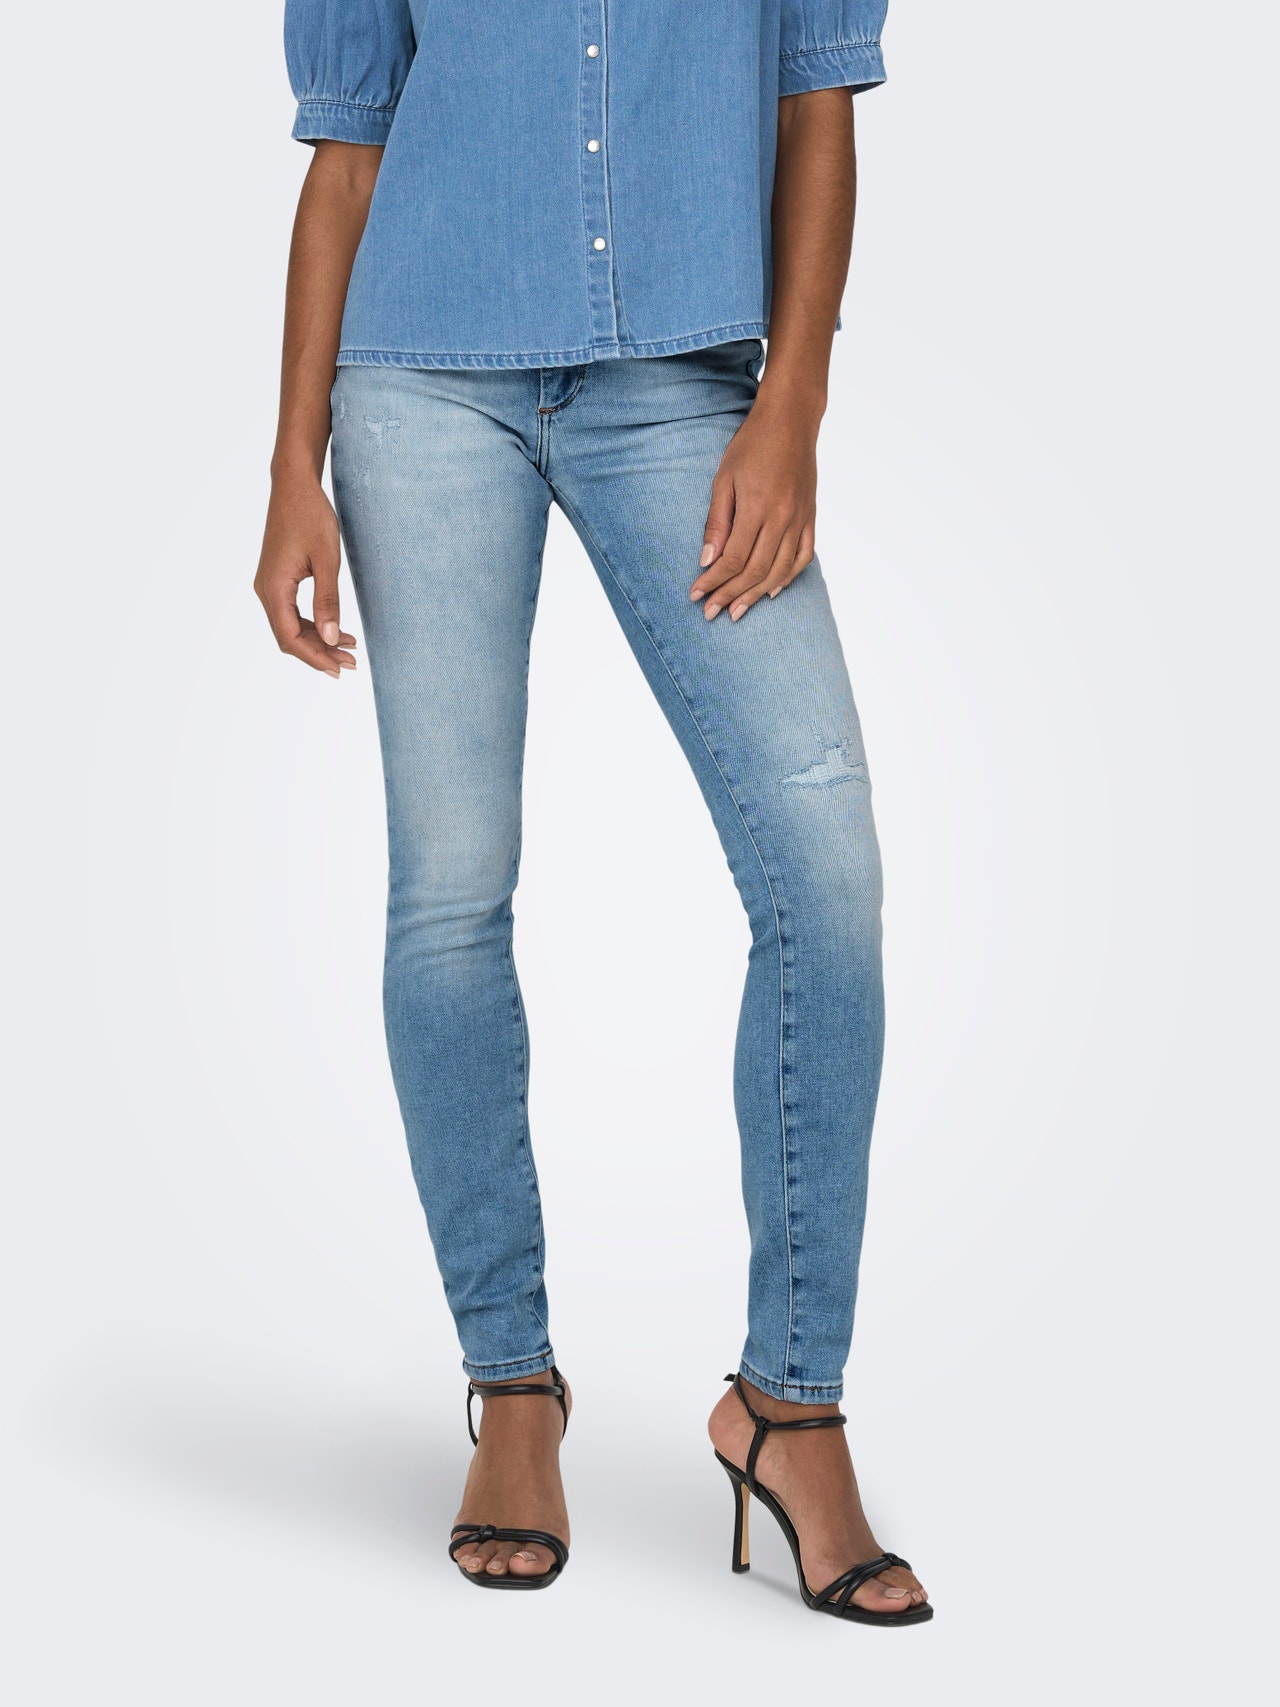 ONLY Skinny Fit Hohe Taille Jeans -Light Medium Blue Denim - 15250149